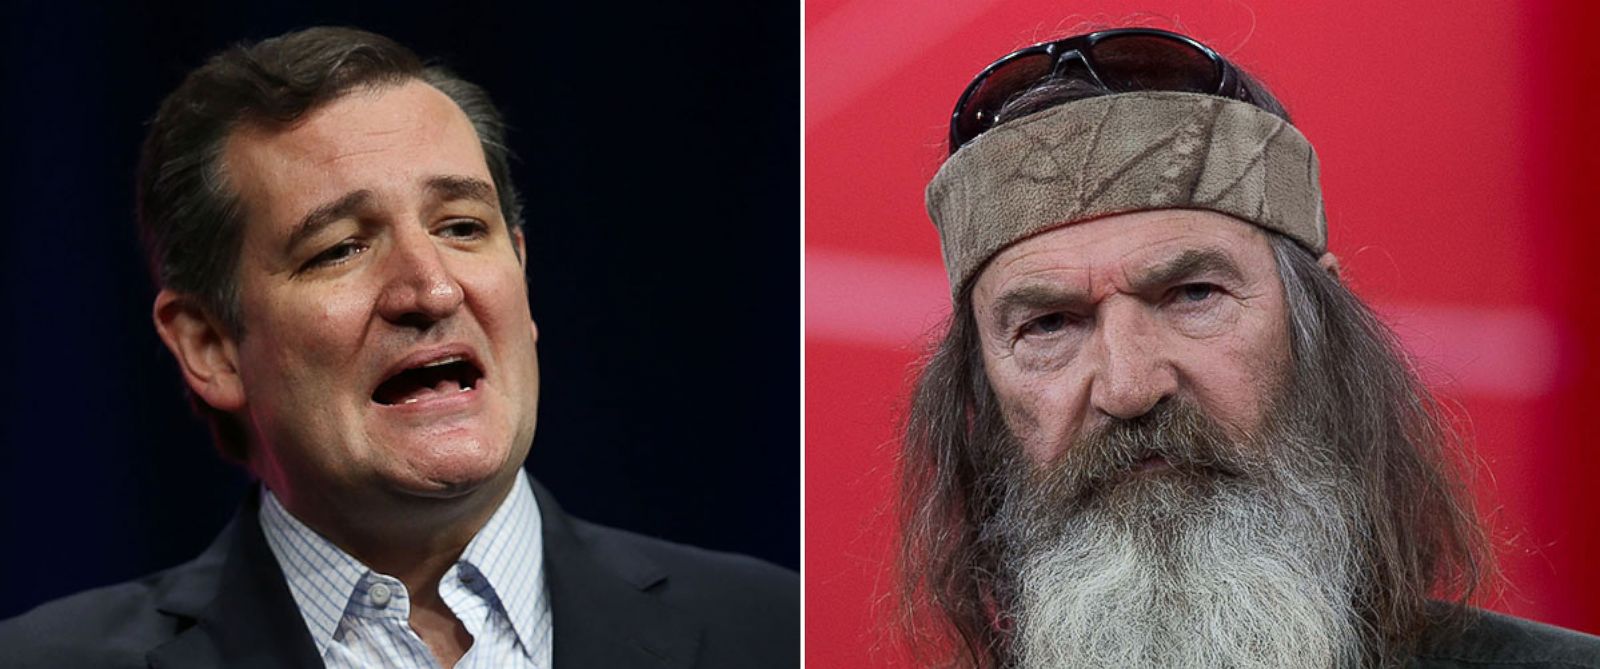 "Duck Dynasty" A&E patriarch Phil Robertson, who endorsed Republican candidate Ted Cruz for president on Jan. 13, told a crowd in Iowa City, Iowa, Sunday that same-sex marriage is "evil" and "wicked." Robertson also said the United States has a "spiritual problem."